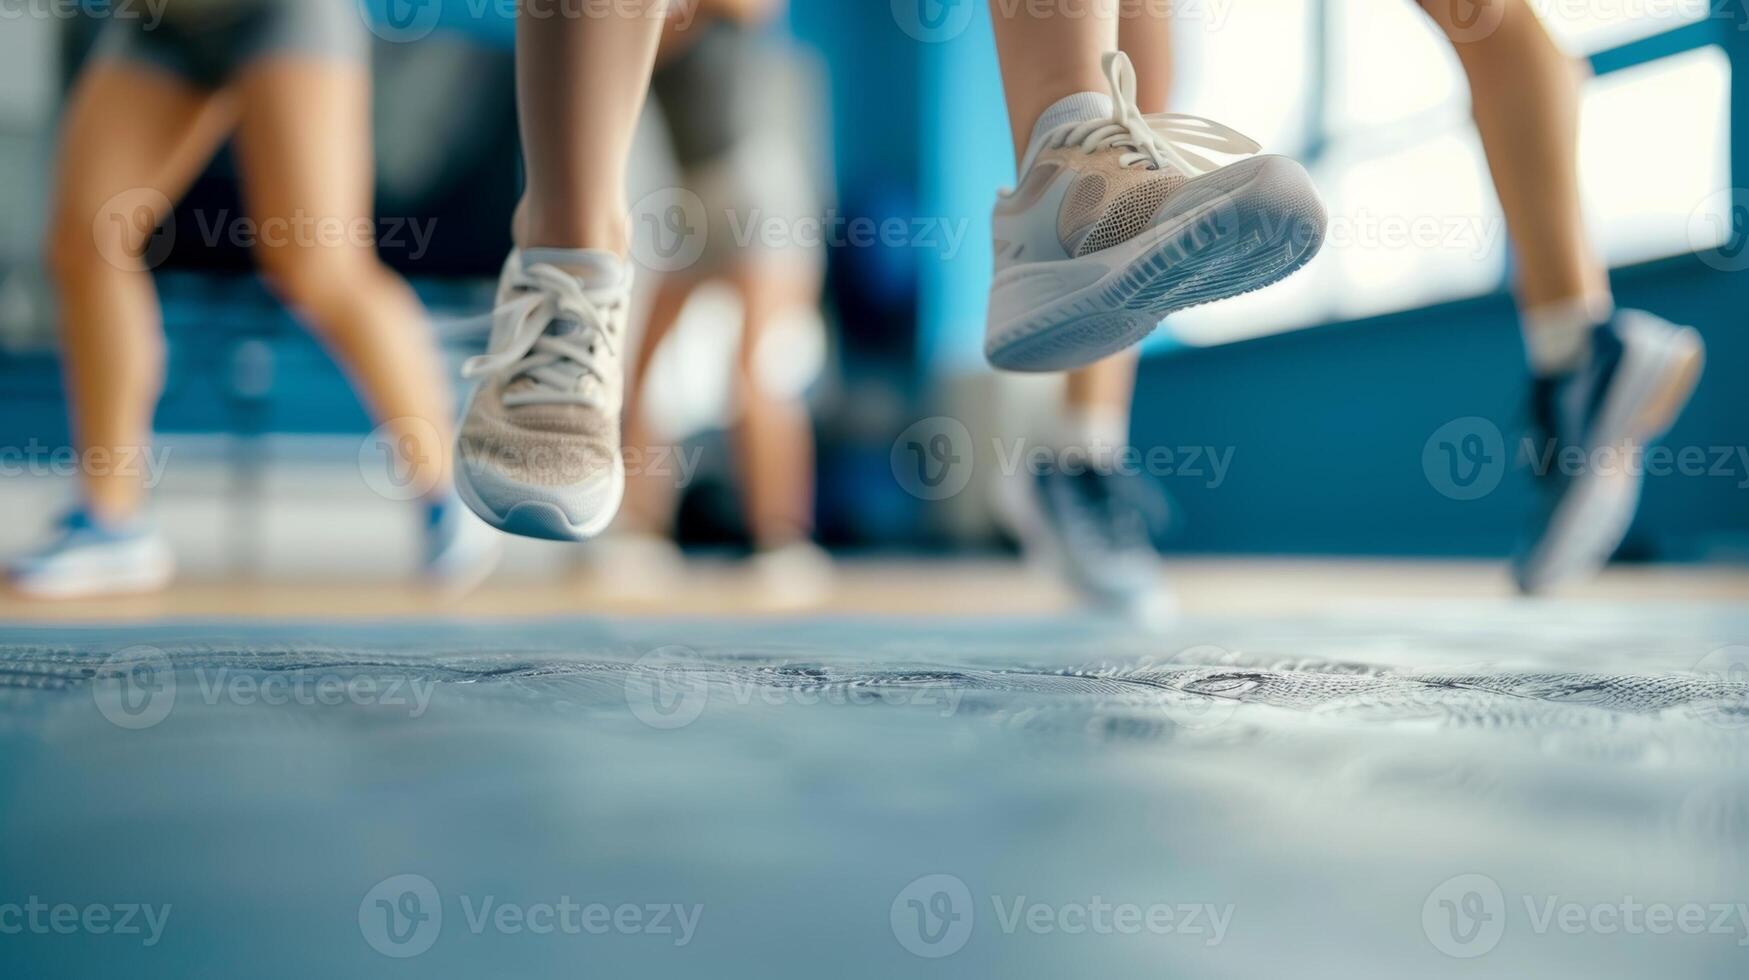 A closeup of a persons feet as they perform a series of jumps and squats in a boutique fitness class focused on plyometrics photo